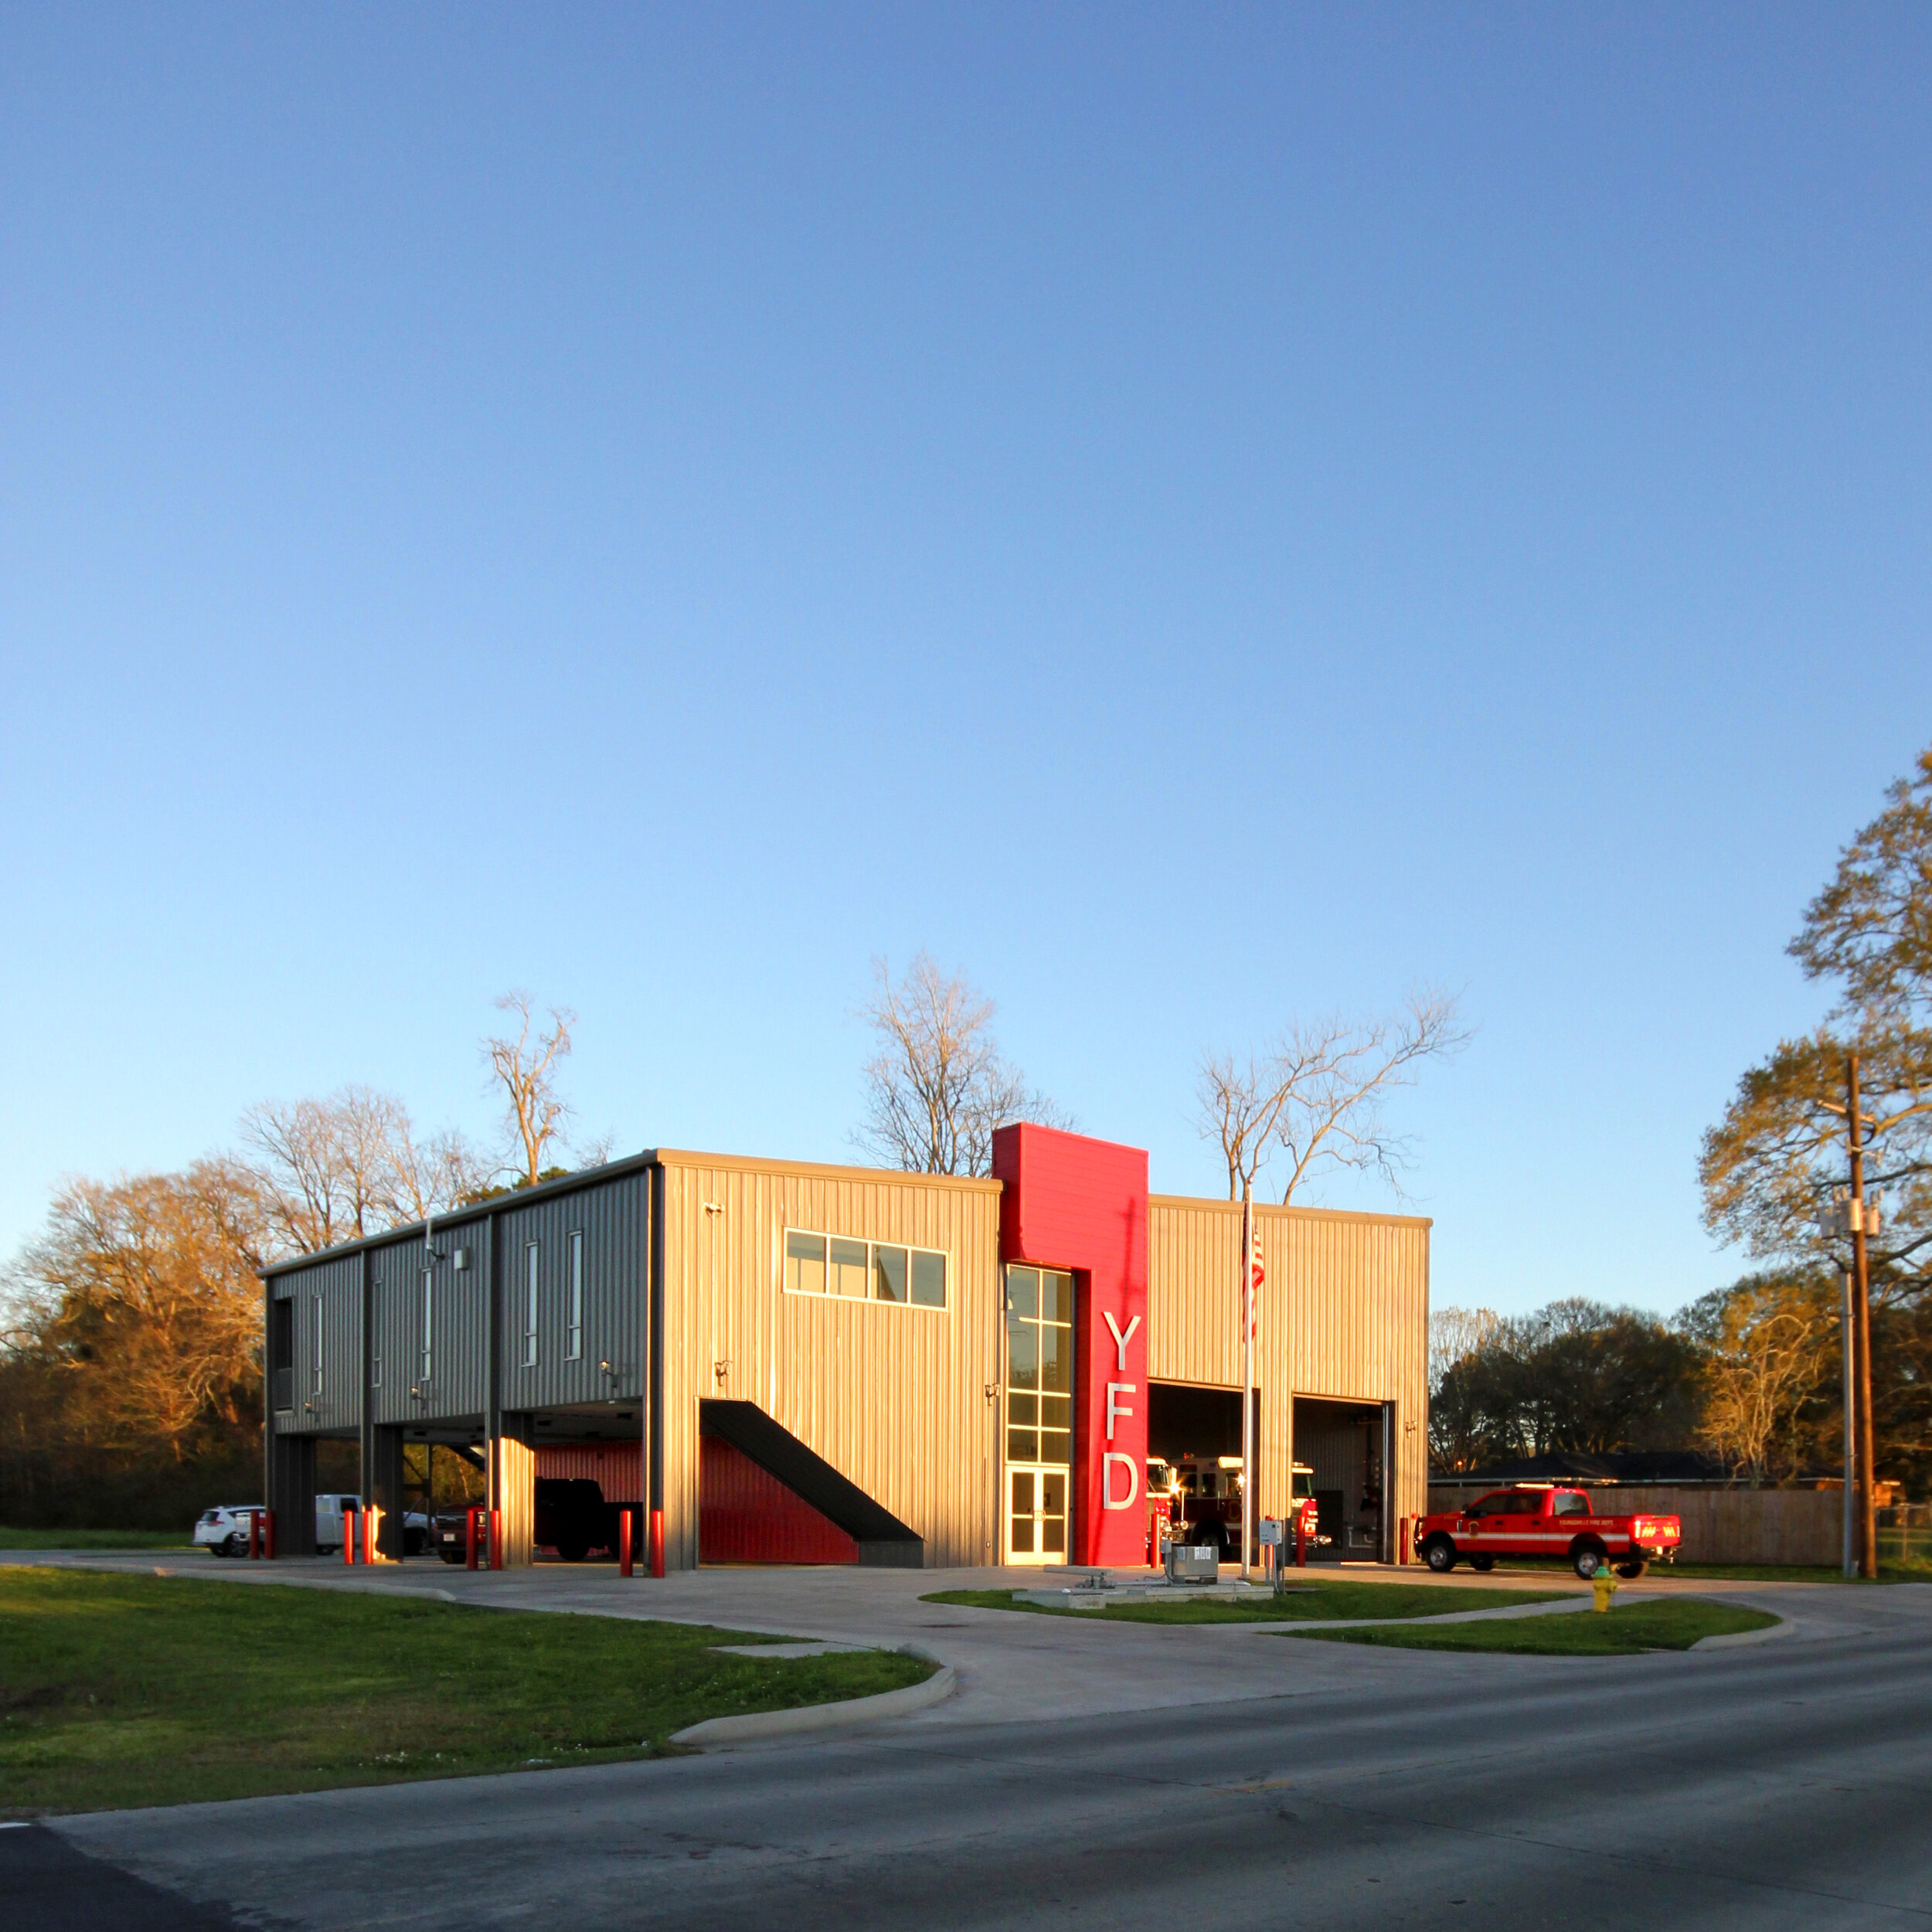 Youngsville Fire Station No. 2